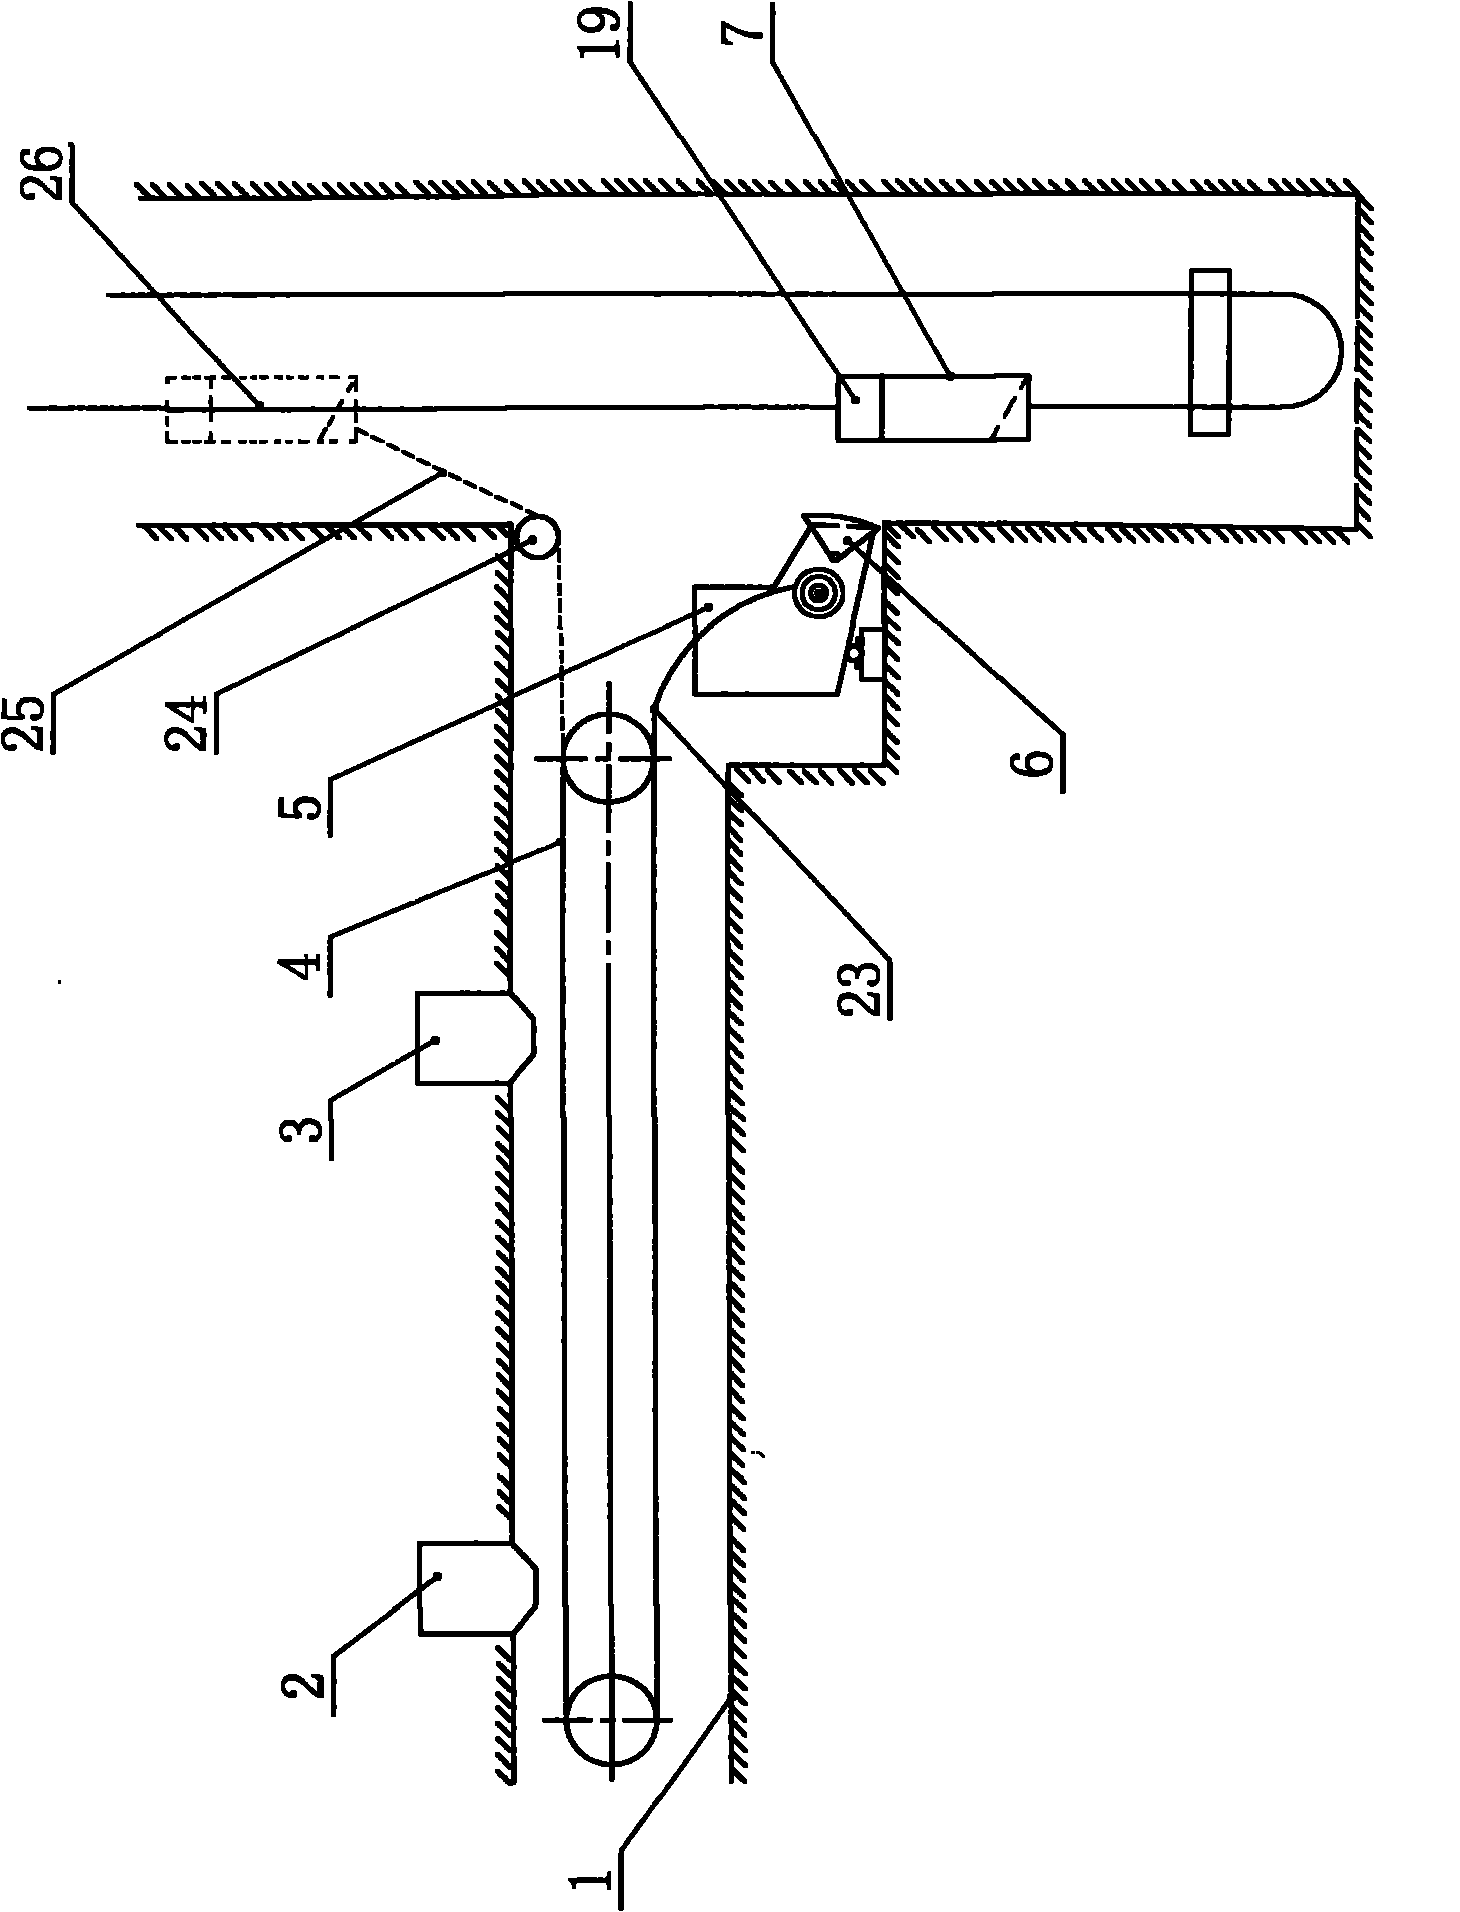 Process for replacing adhesive tape for adhesive tape transporter of coal mine main shaft loading chamber